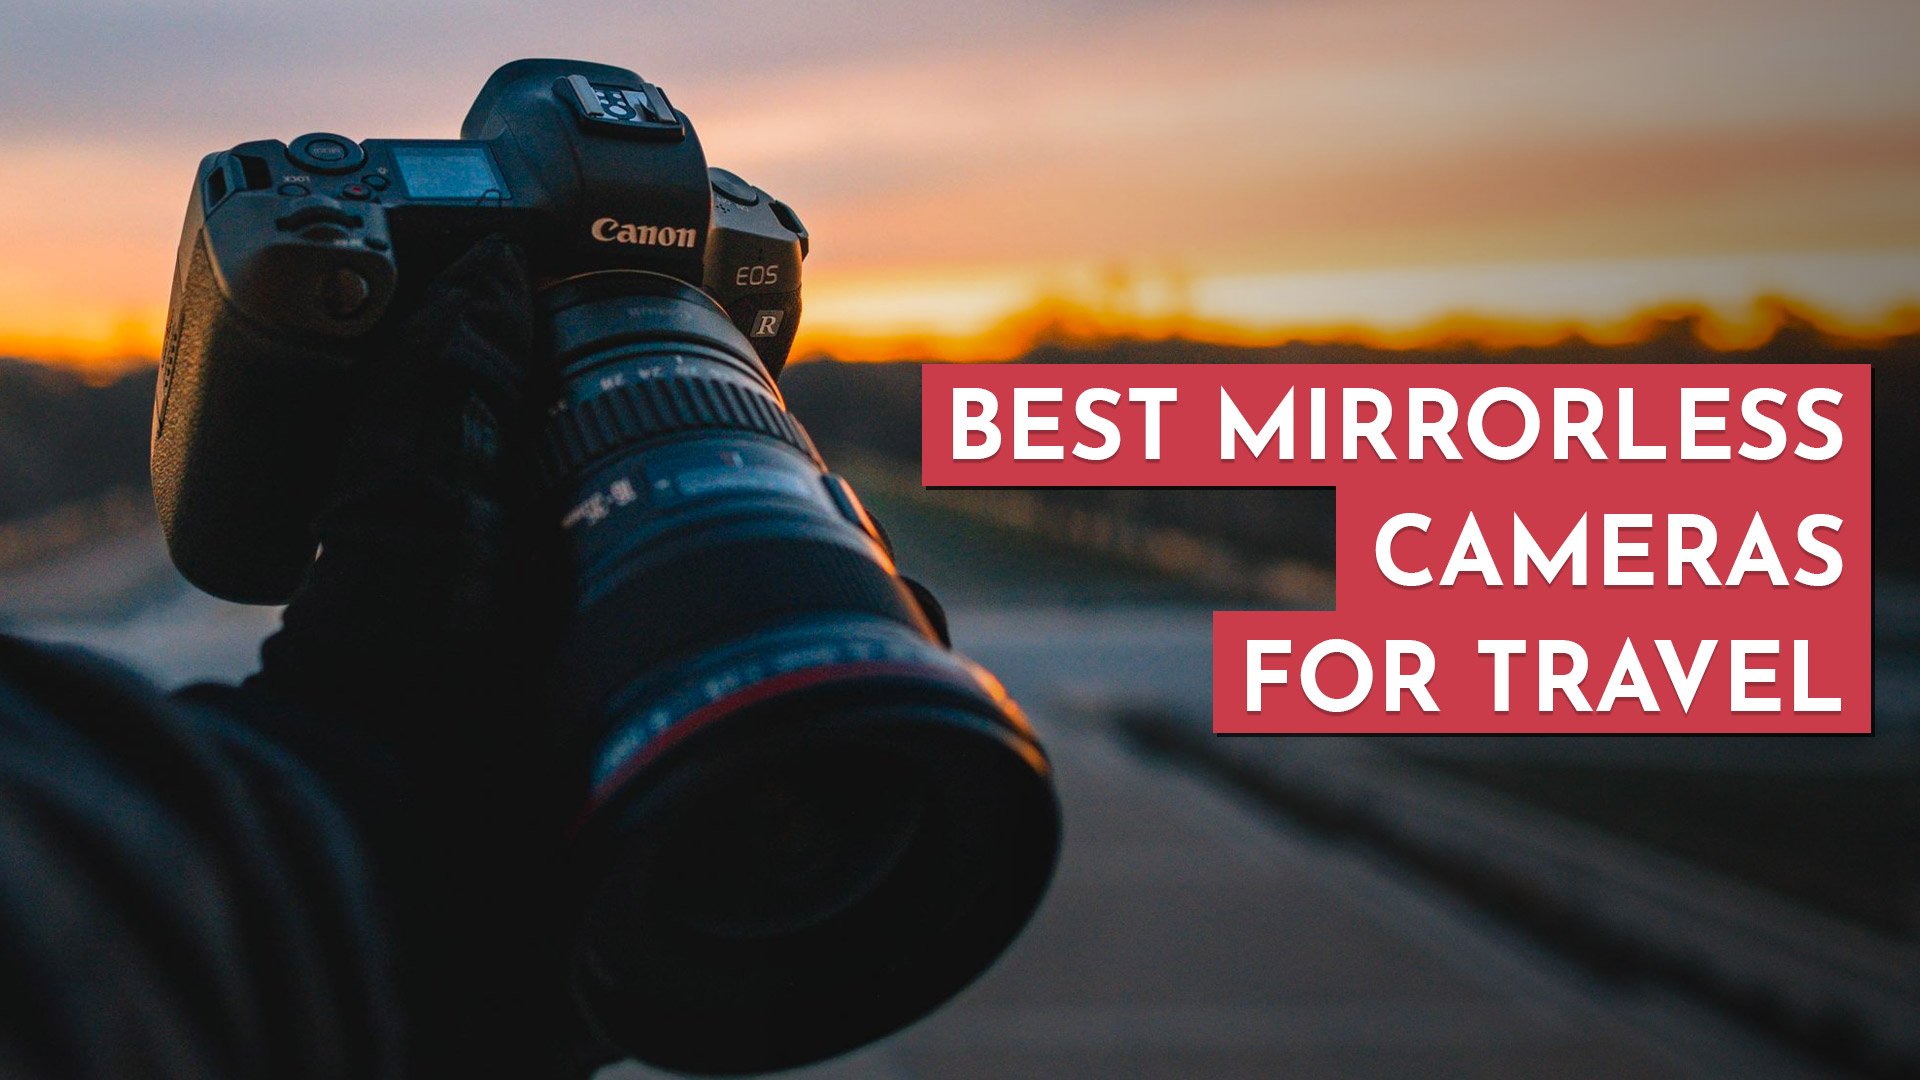 Best Canon Camera 2021: Mirrorless, DSLR and Compact